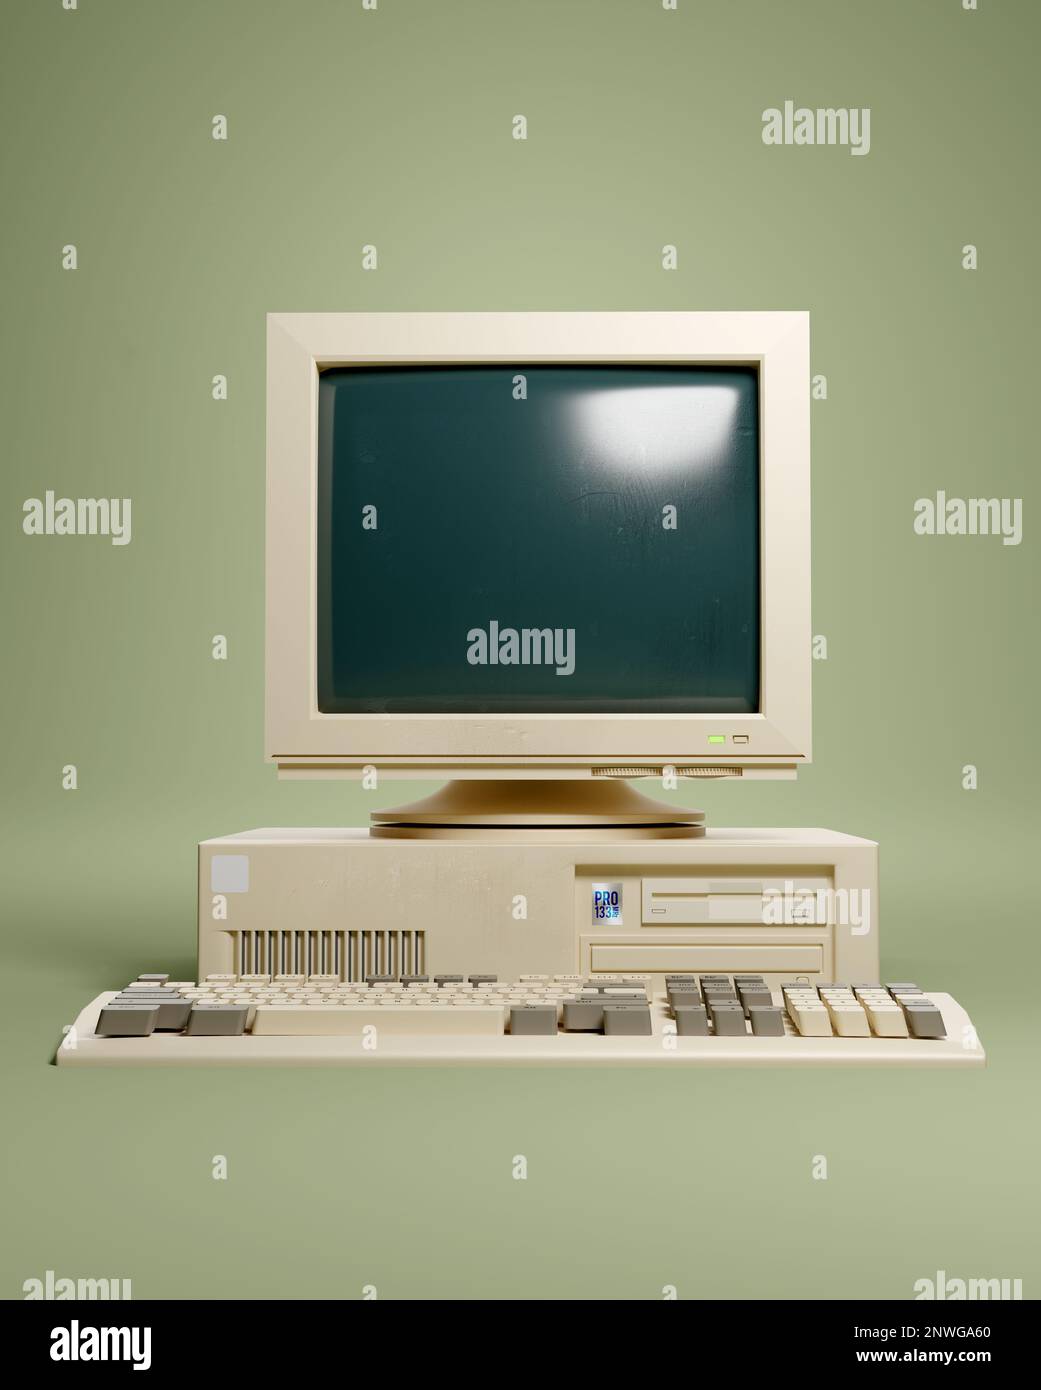 Classic retro 1990s beige home PC computer and CRT monitor. 3D illustration Stock Photo